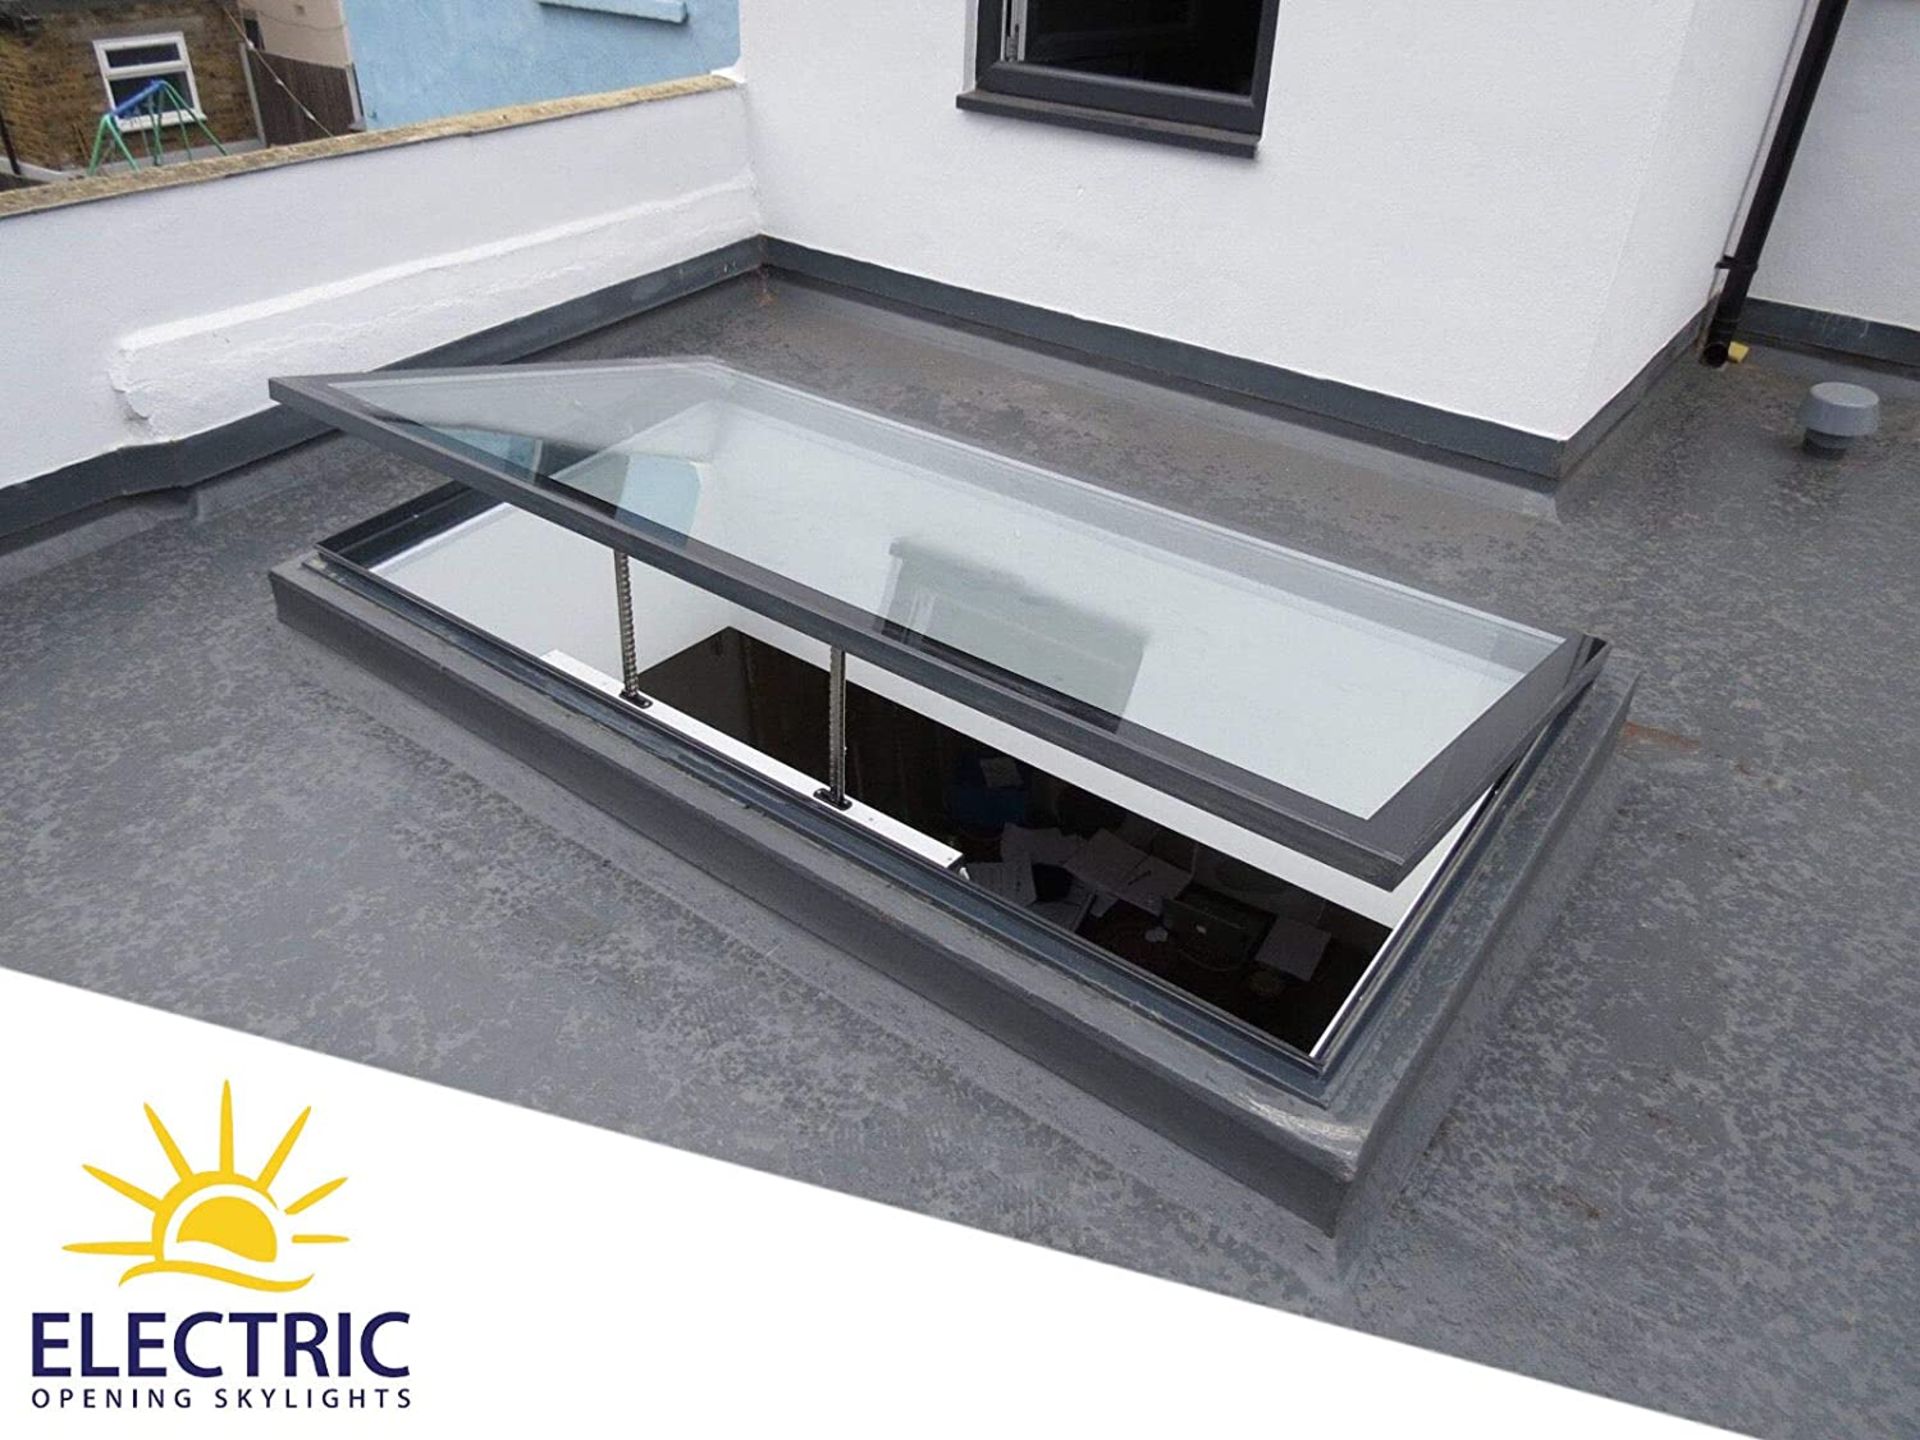 Panoroof (EOS) Electric Opening Skylight 600x900mm - Aluminiun Frame Double Glazed Laminated Self-